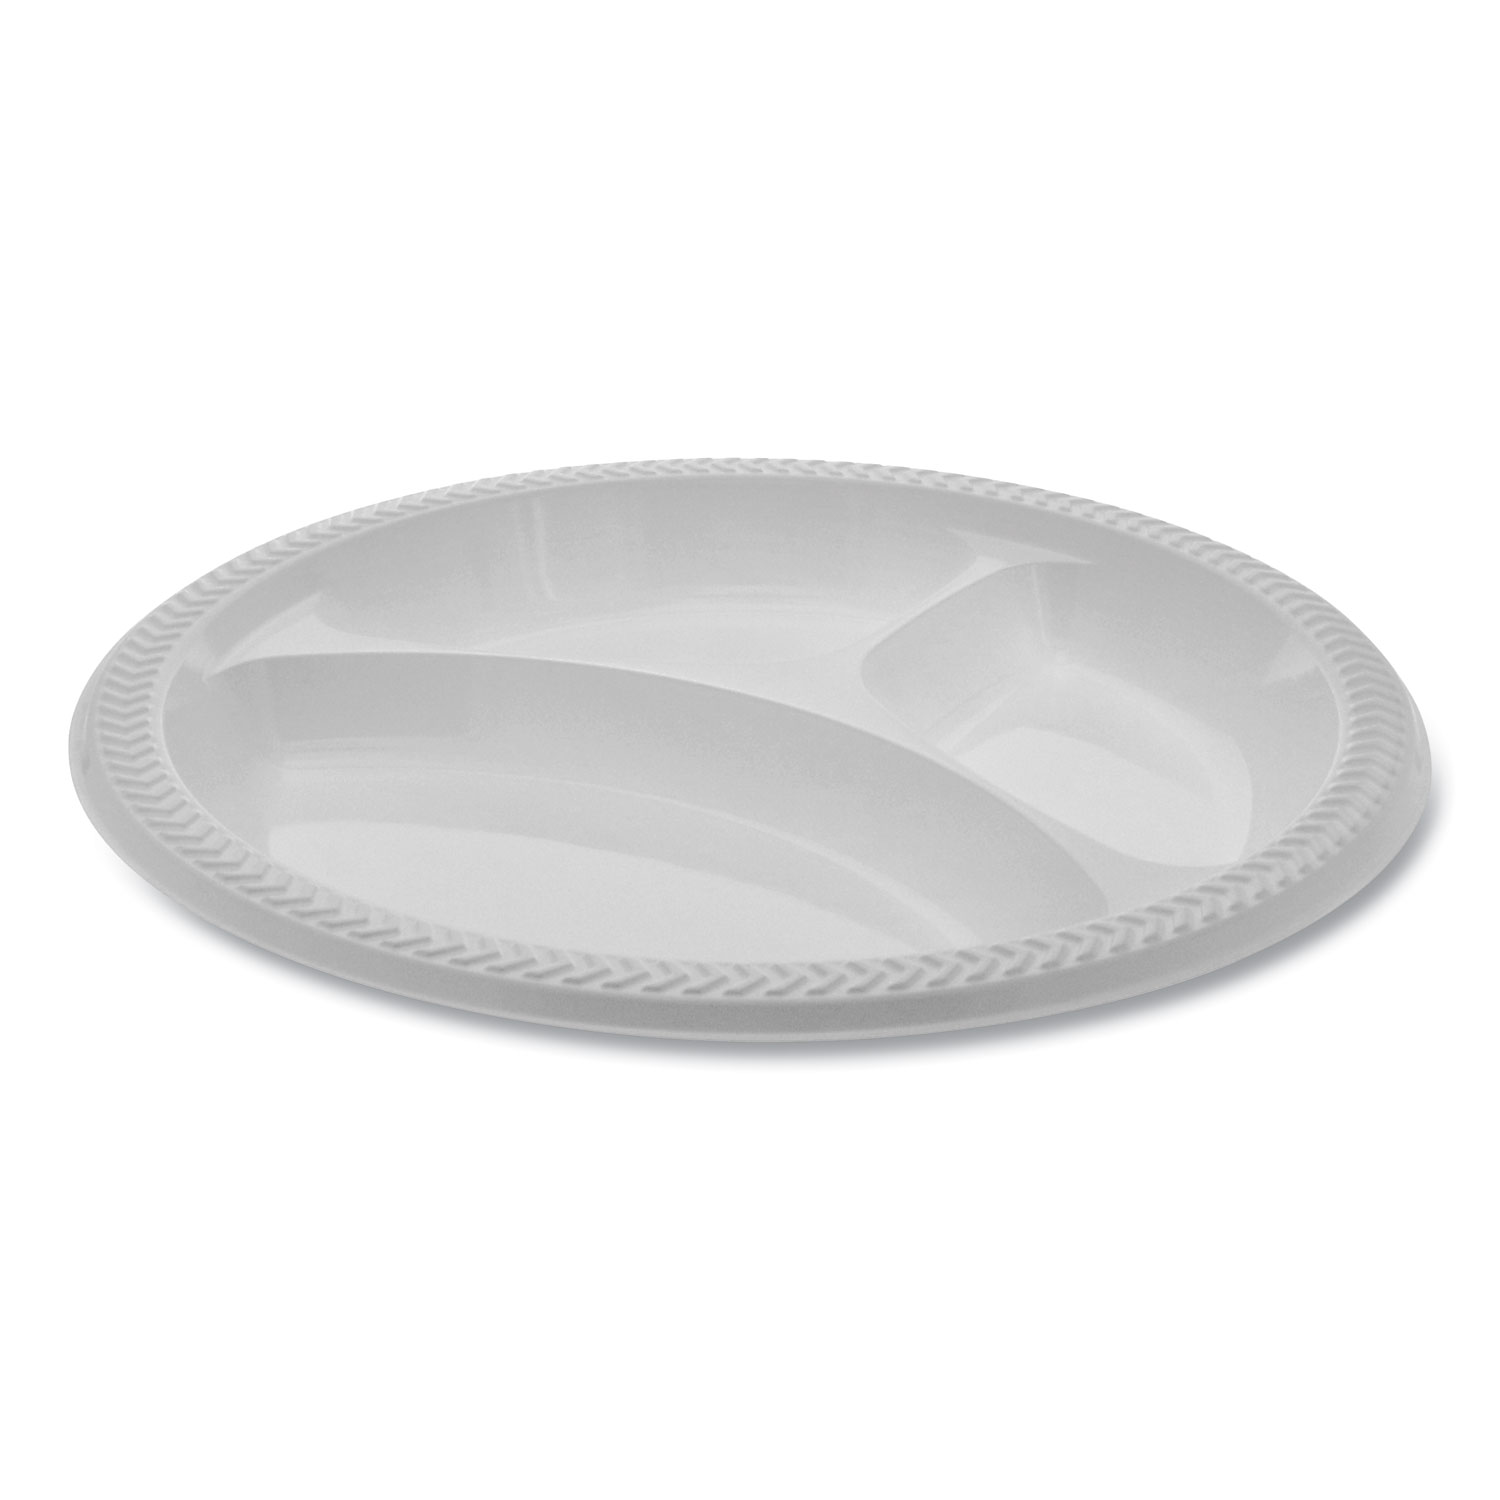  Pactiv MIC10Y Meadoware OPS Dinnerware, 3-Compartment Plate, 10.25 Diameter, White, 500/Carton (PCTMIC10Y) 